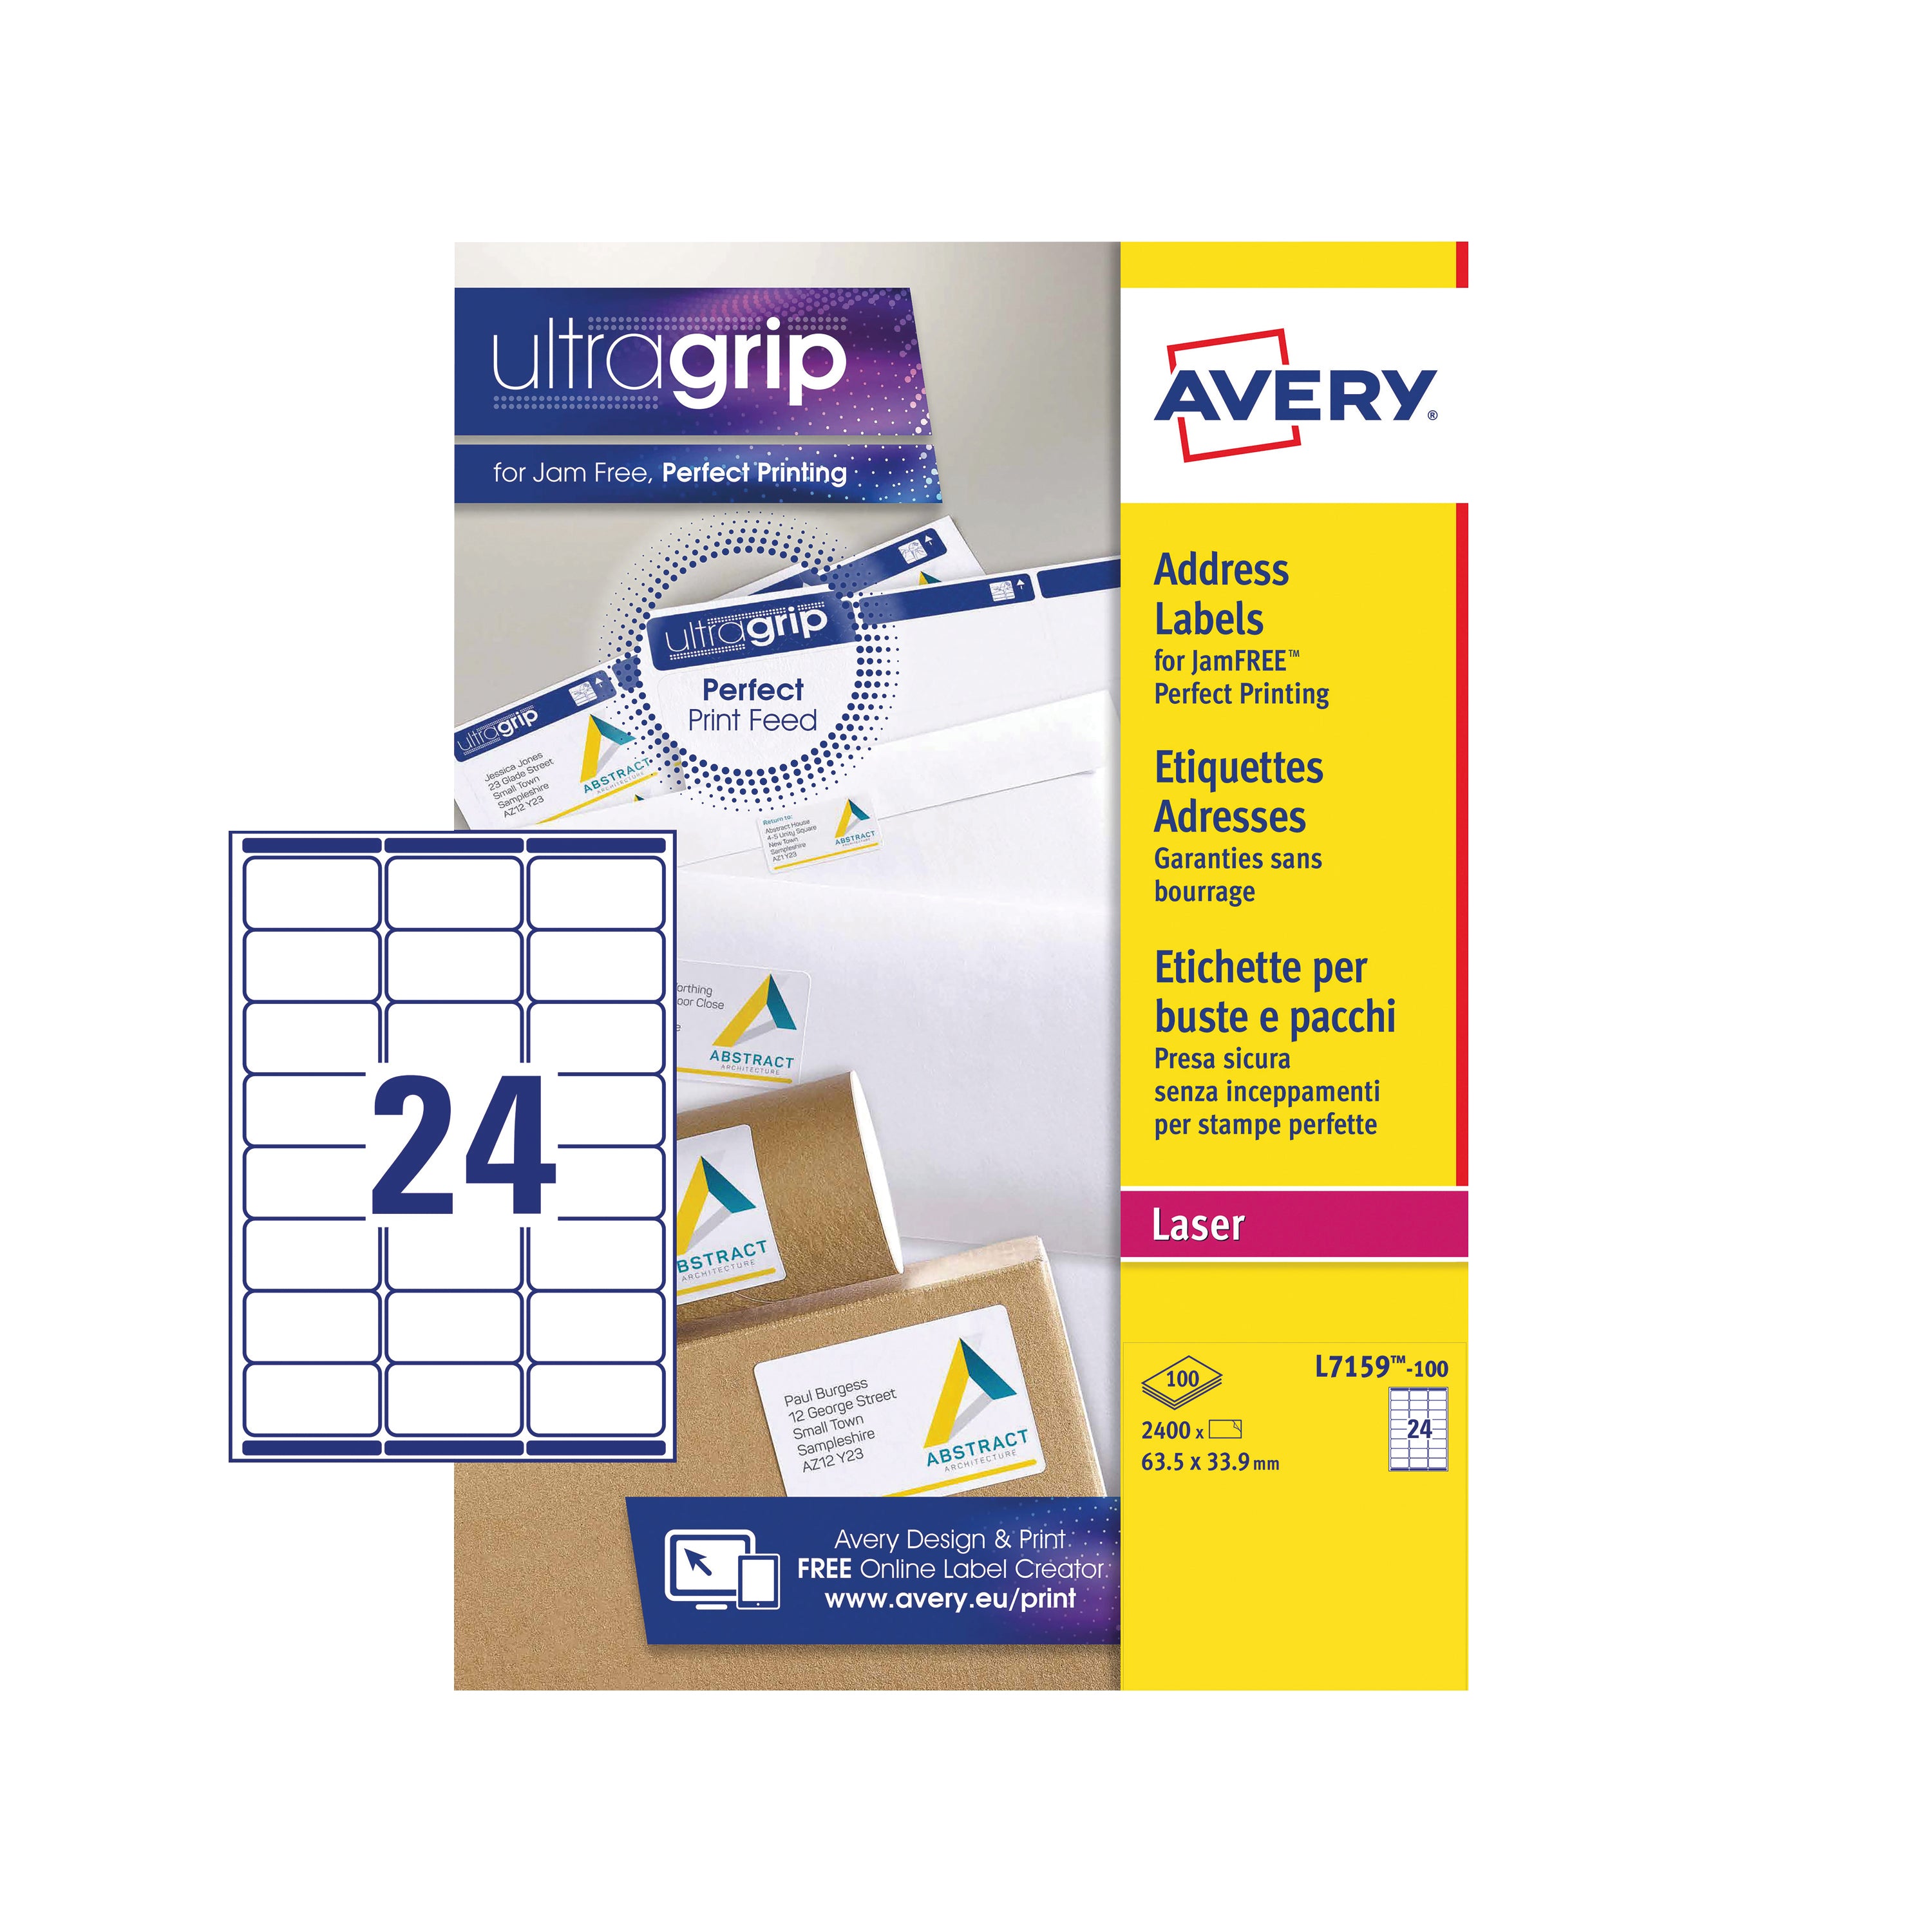 Avery Ultragrip Laser Labels 63.5x33.9mm White (Pack of 2400) L7159-100